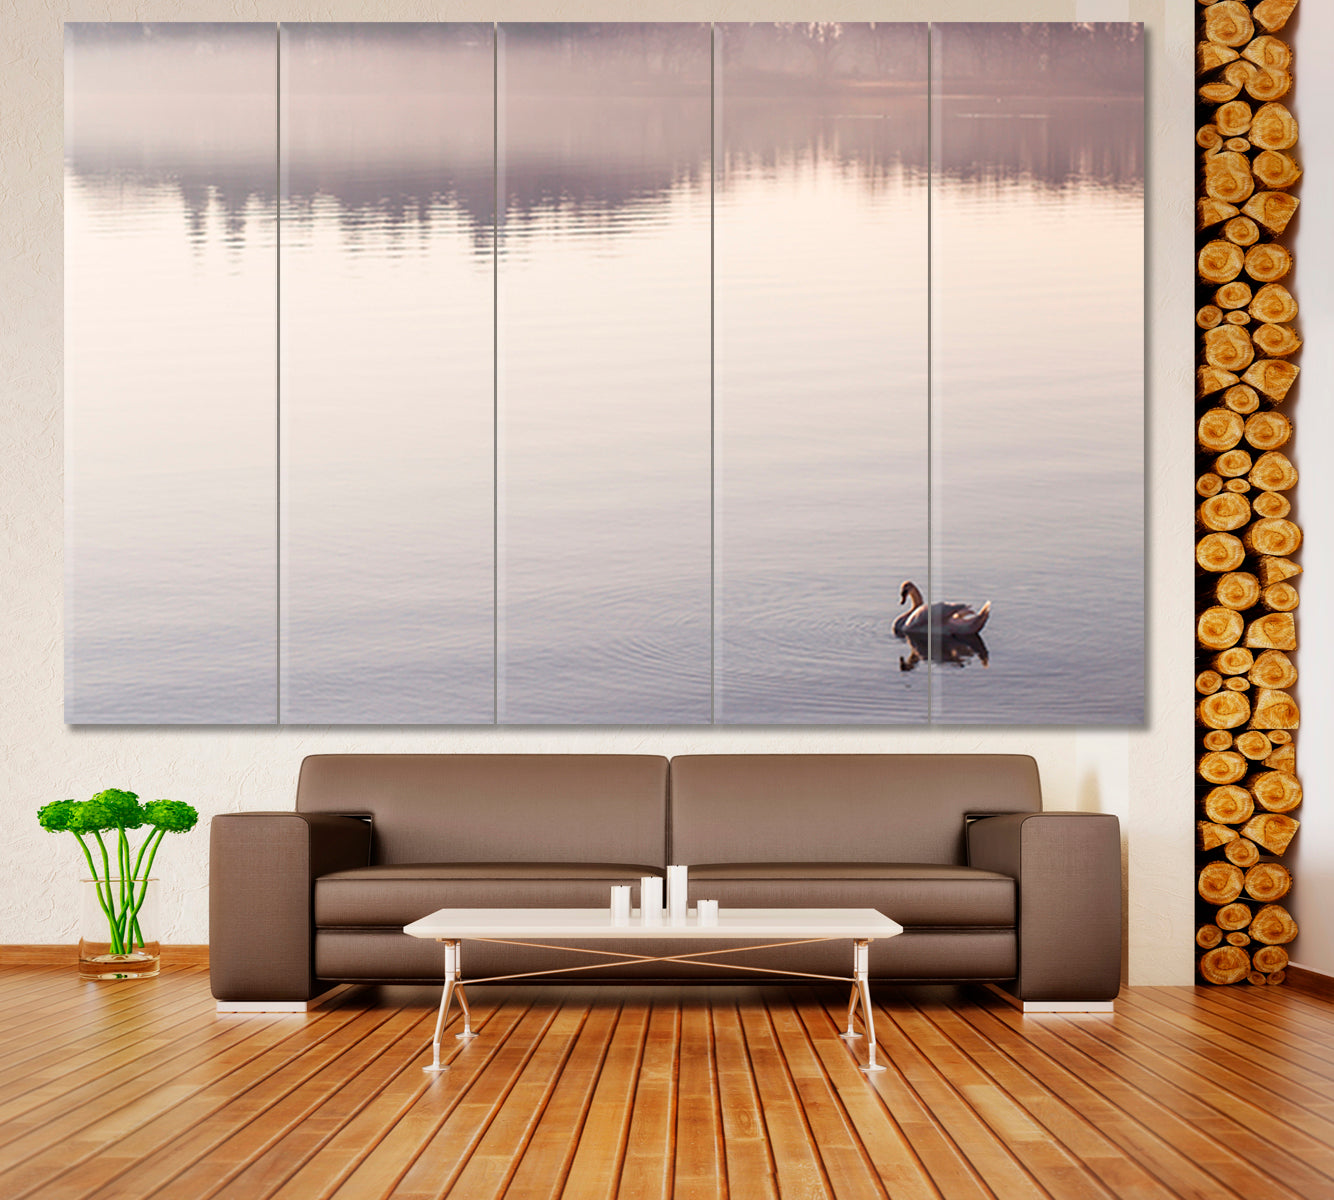 SERENITY Peaceful Landscape Water Reflection Bodensee Lake Germany Little Bird Duck Flapping Wings in the Water Scenery Landscape Fine Art Print Artesty   